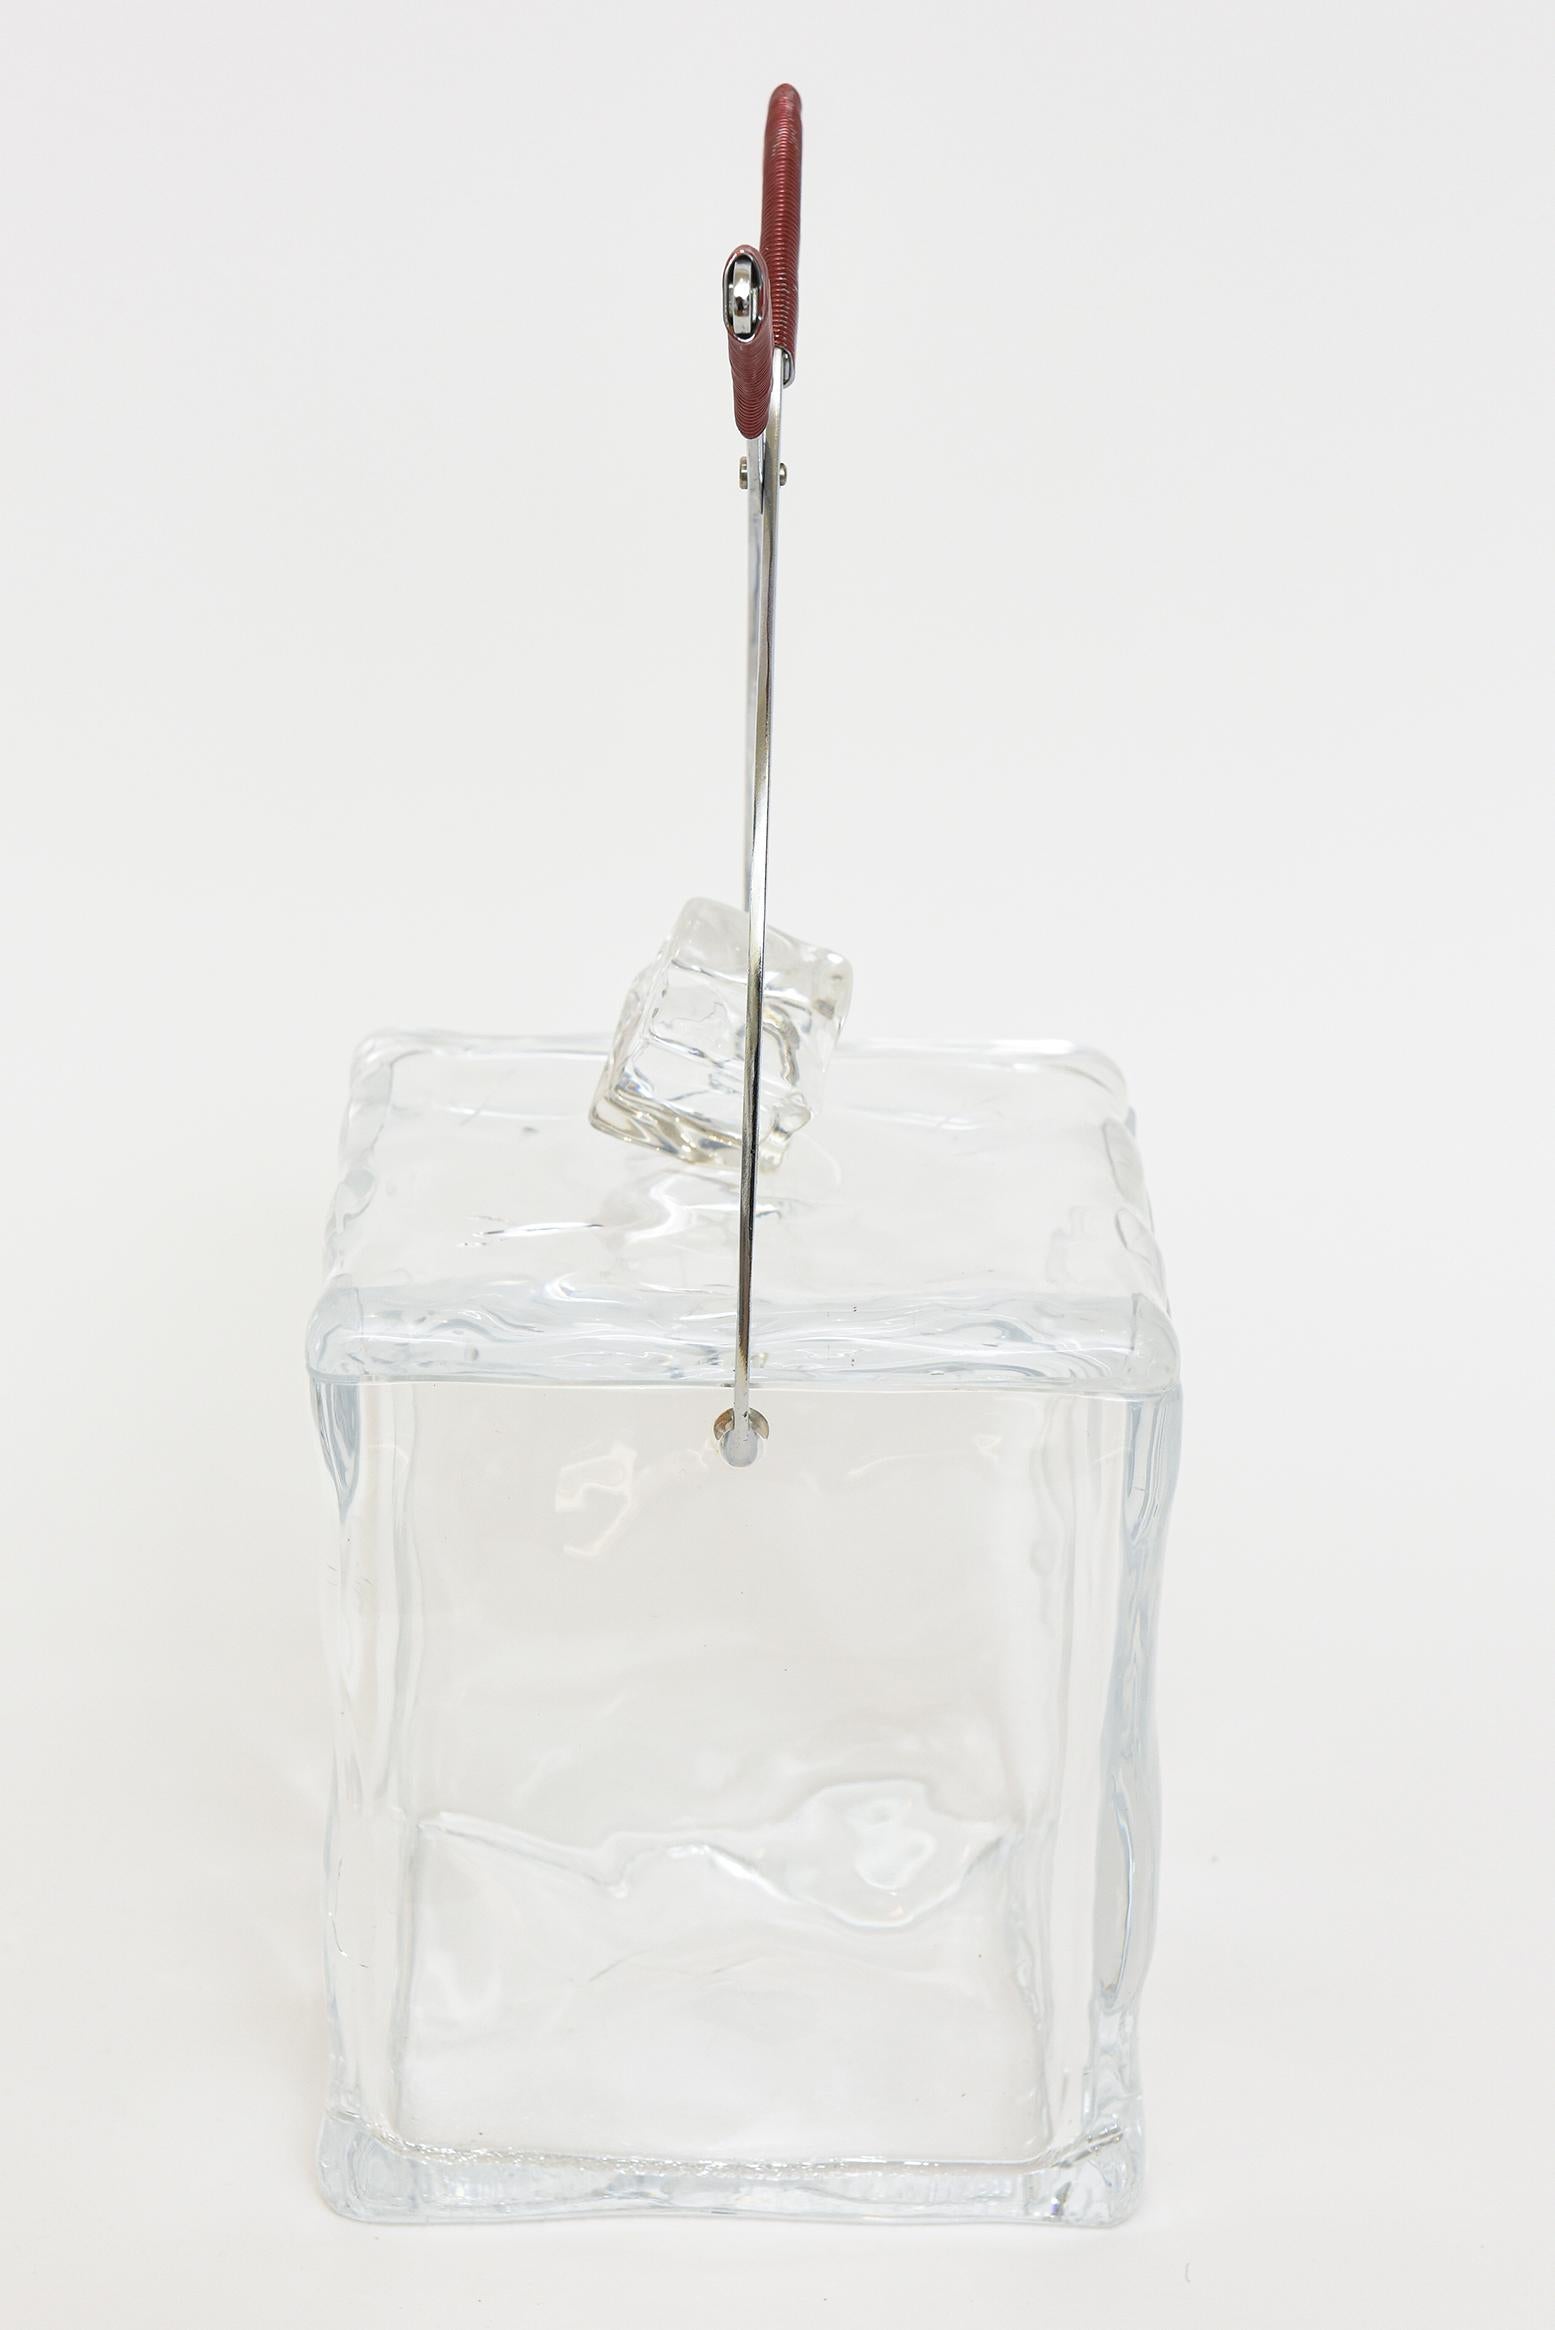 Modern Italian Lucite Chrome Twisted Tong Ice Bucket with Wrapped Red Wire Barware.